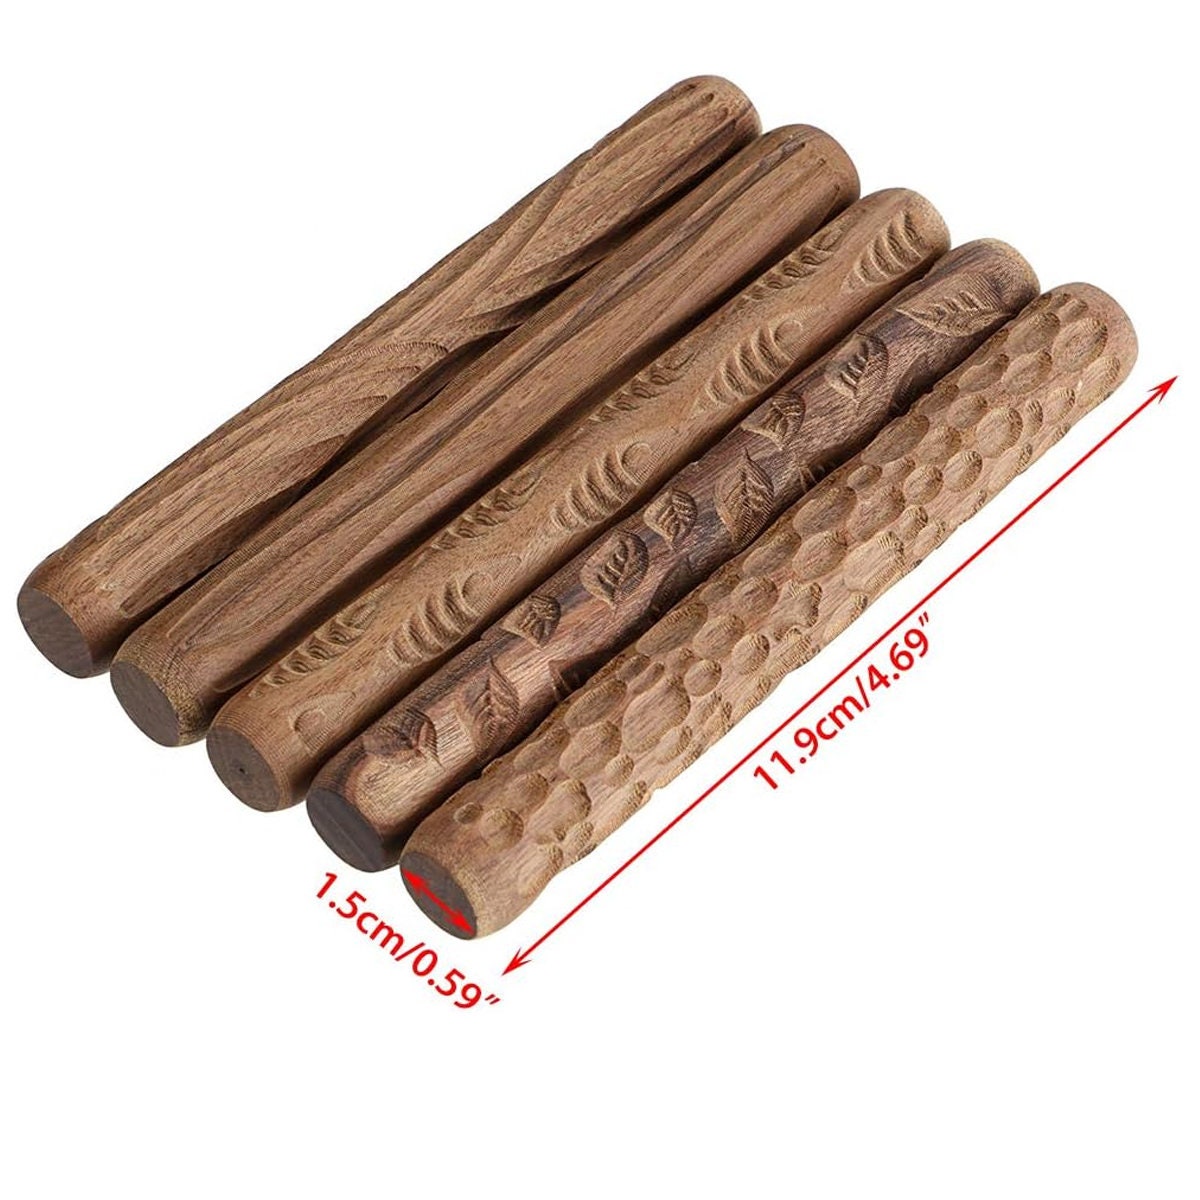 Set Of 5 Clay Modeling Pattern Rollers Kit, Fish Leaves Cobblestone Ripple  Wood Grain Pattern 4.7 In Clay Rolling Pin Textured Hand Roller Wooden Hand